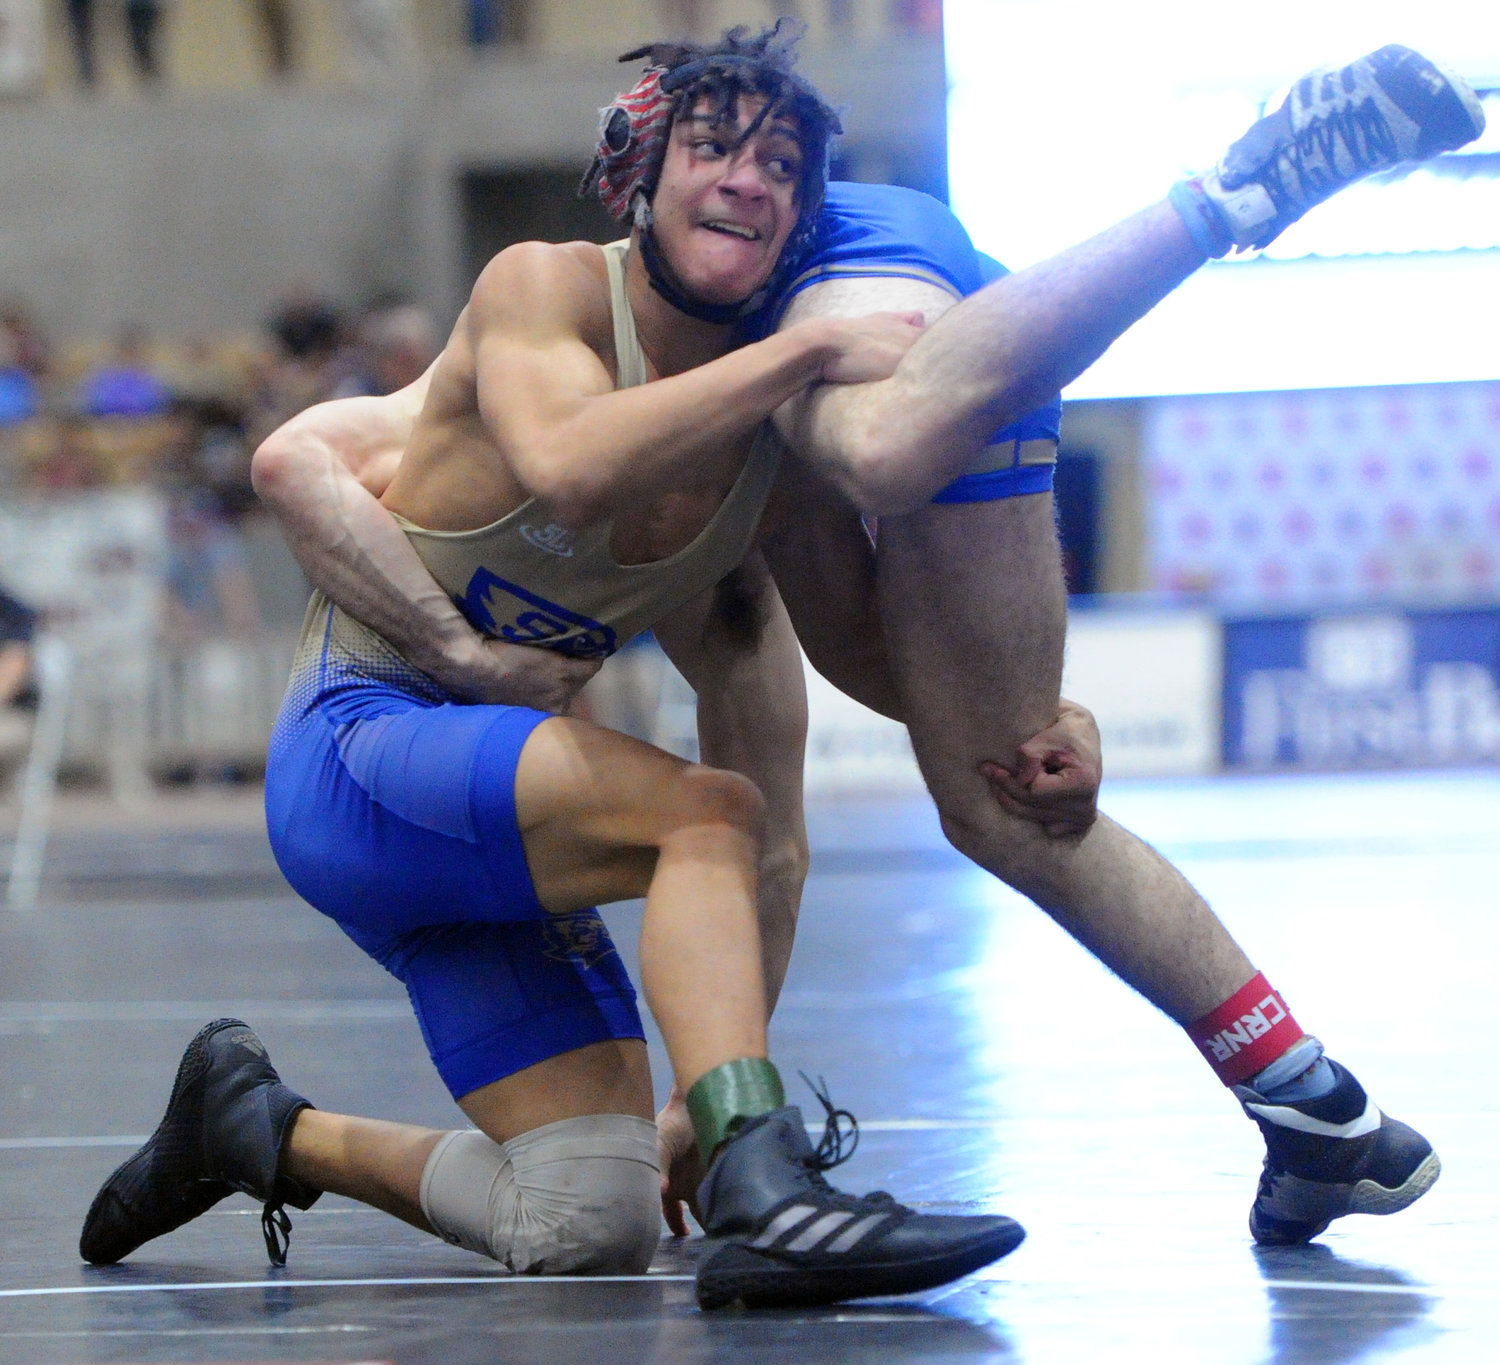 Landon McCroskey upends his opponent in the first match of the 152-pound Class 2A bracket on Thursday.